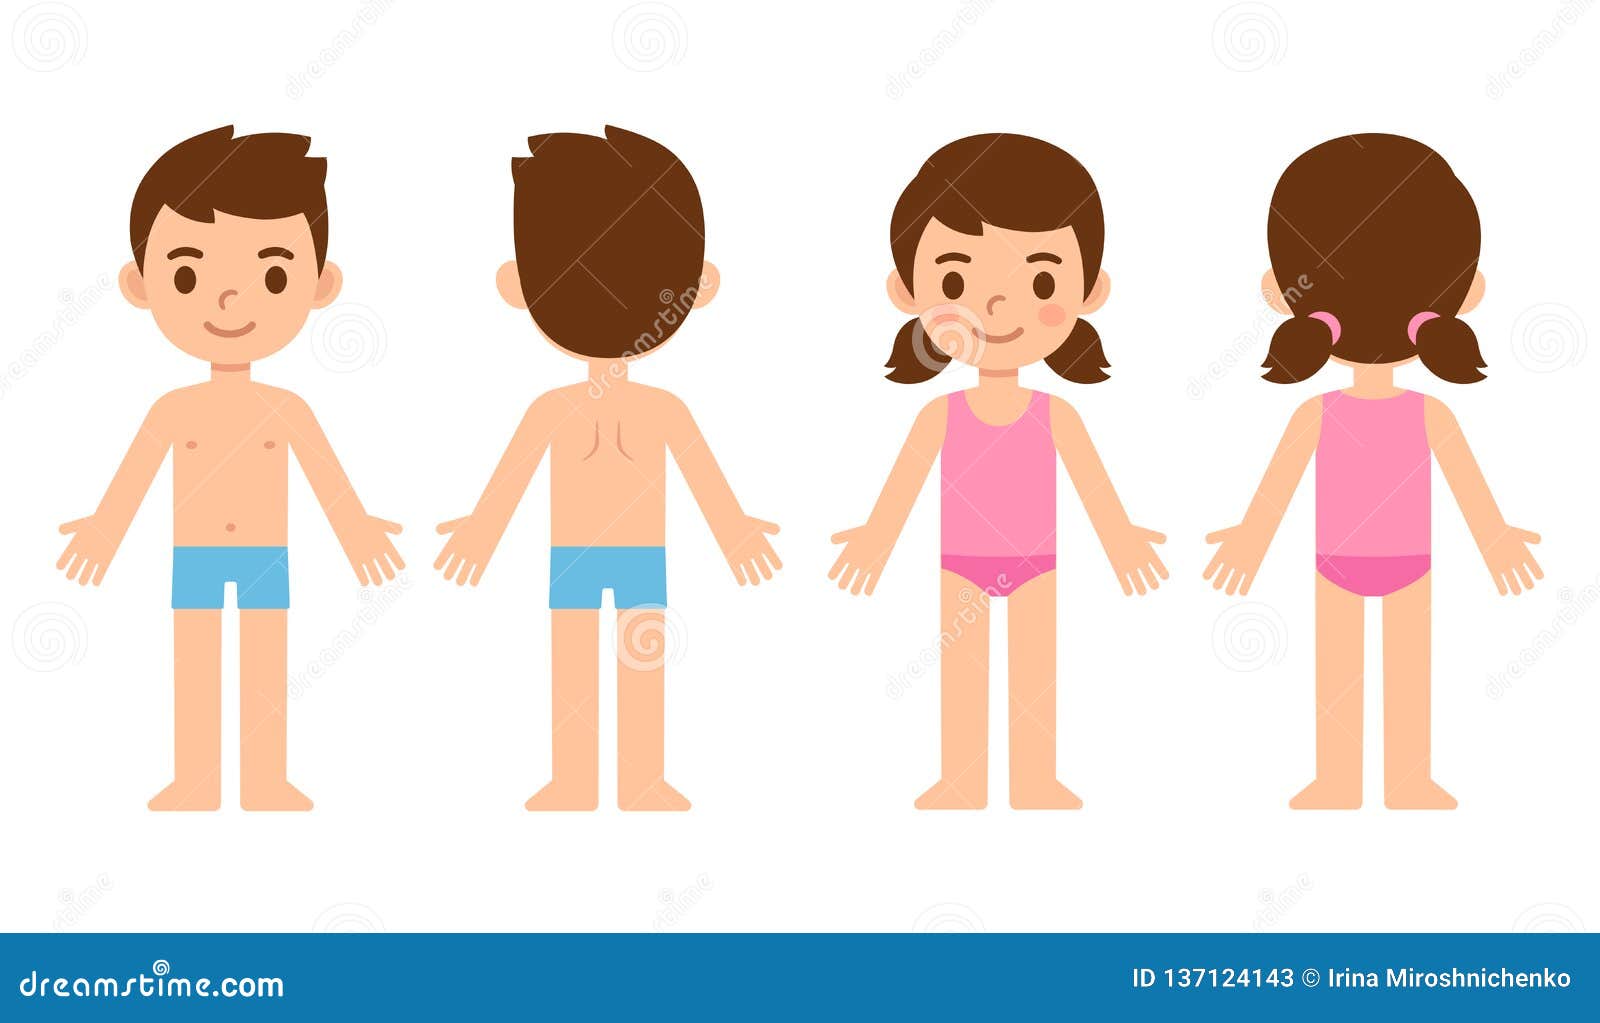 Cartoon Children Front And Back Stock Vector - Illustration ...